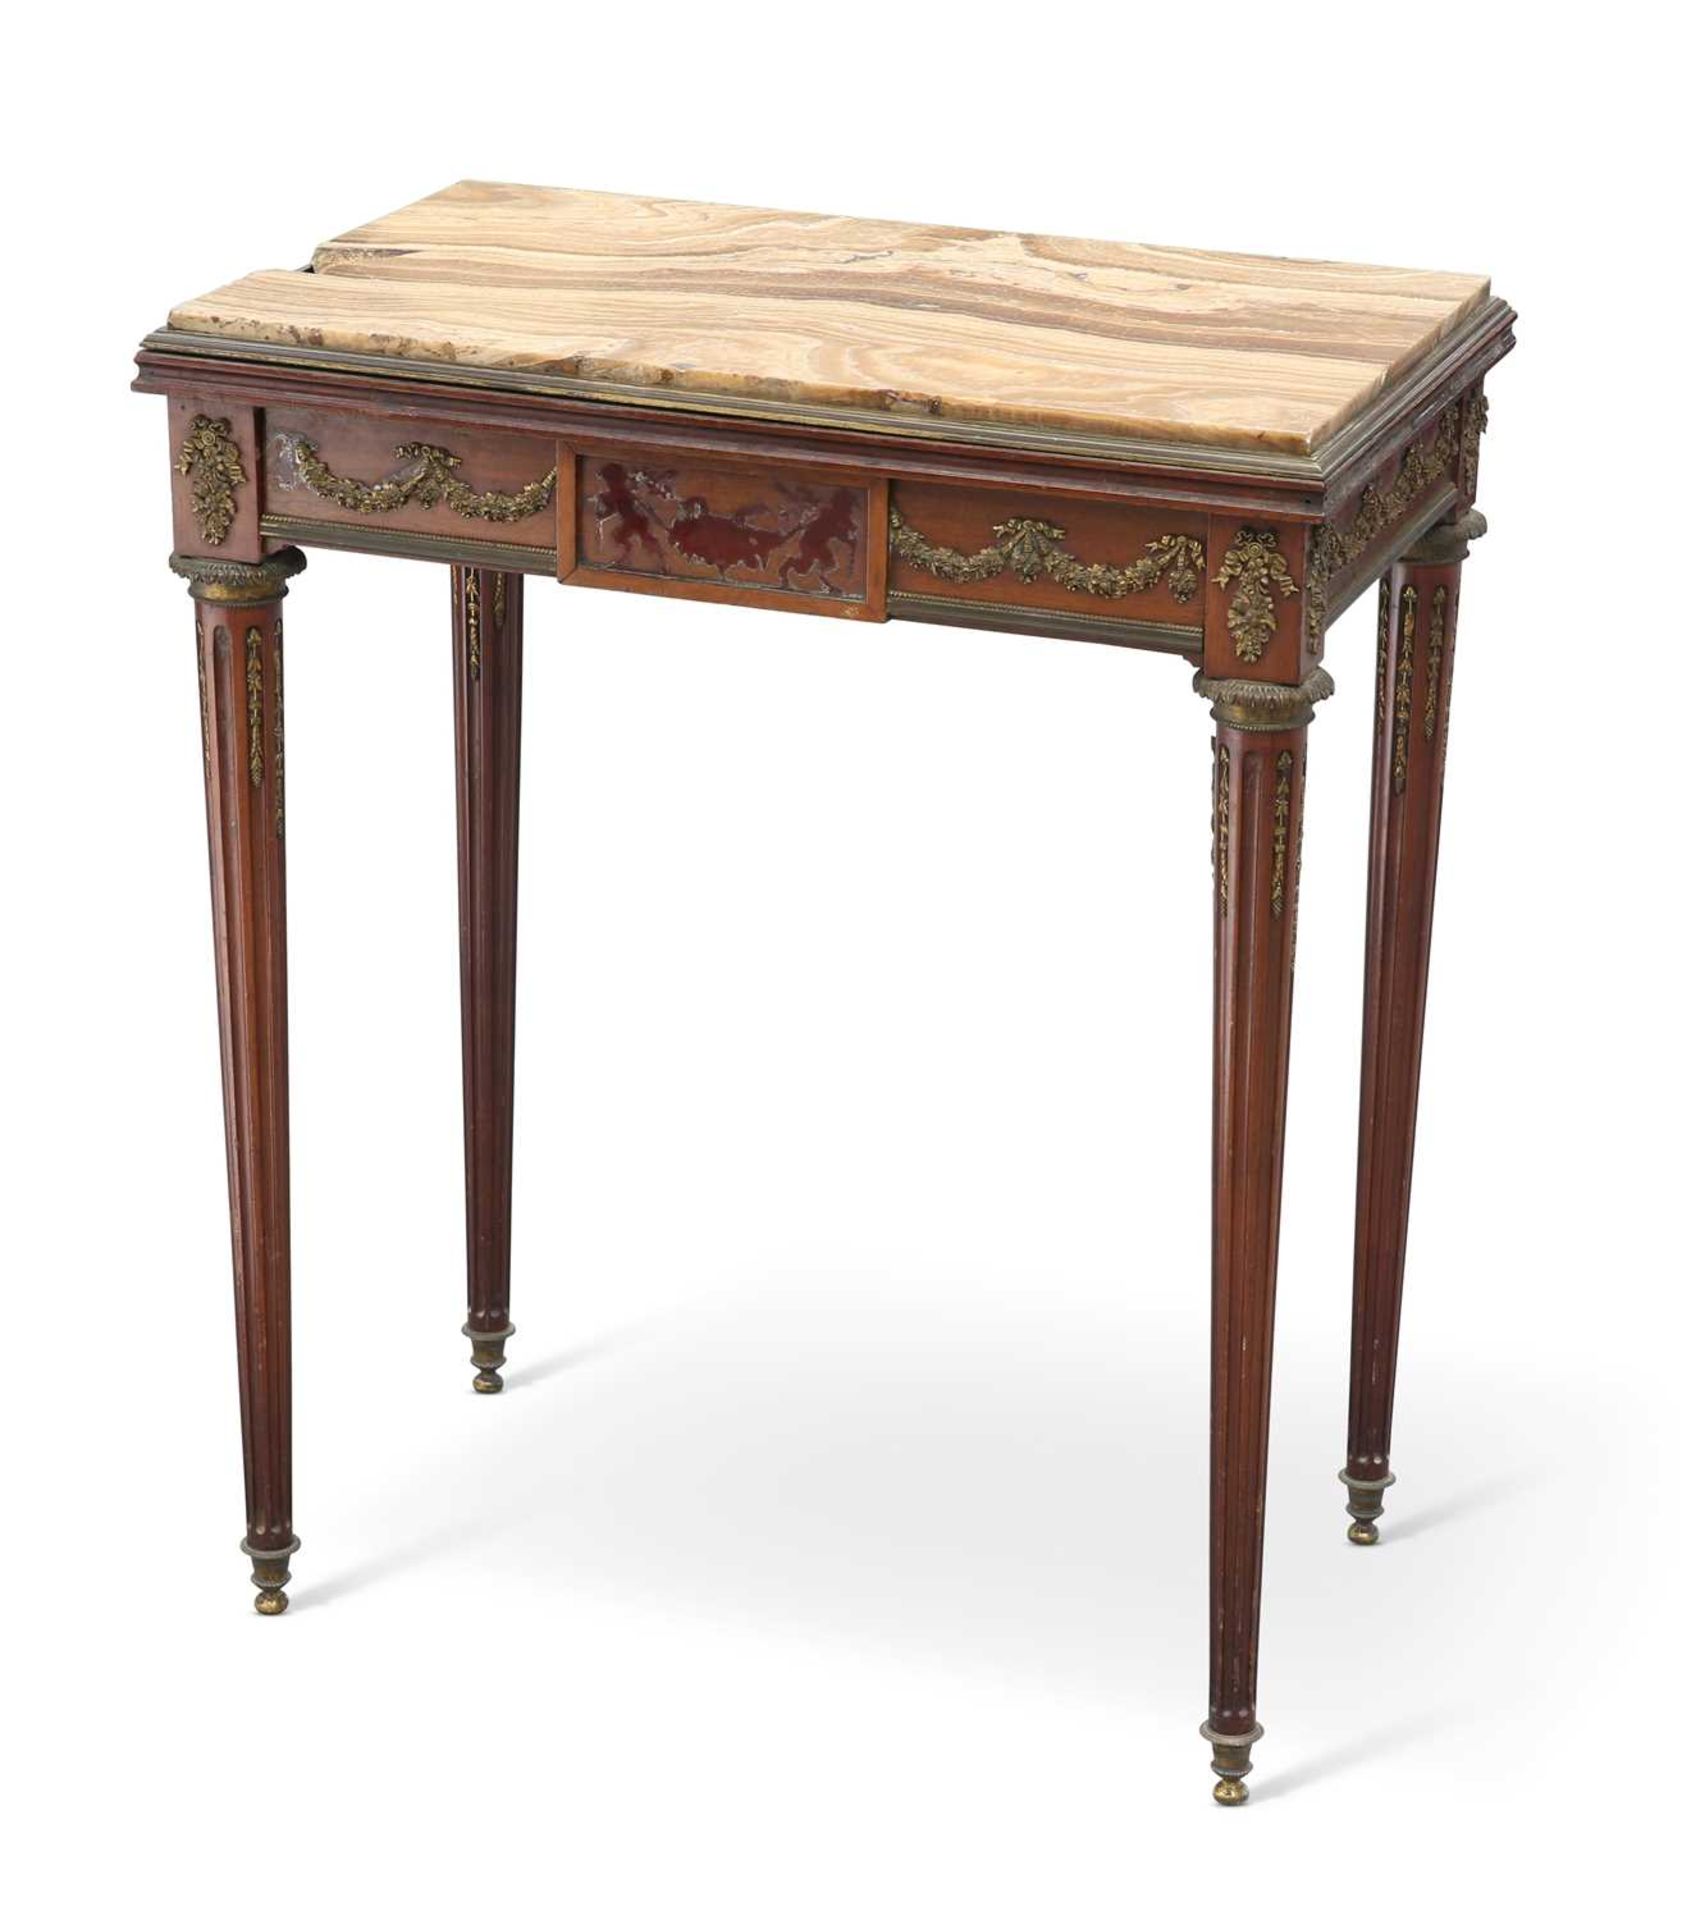 A LOUIS XVI STYLE MARBLE-TOPPED, GILT-METAL MOUNTED MAHOGANY SIDE TABLE